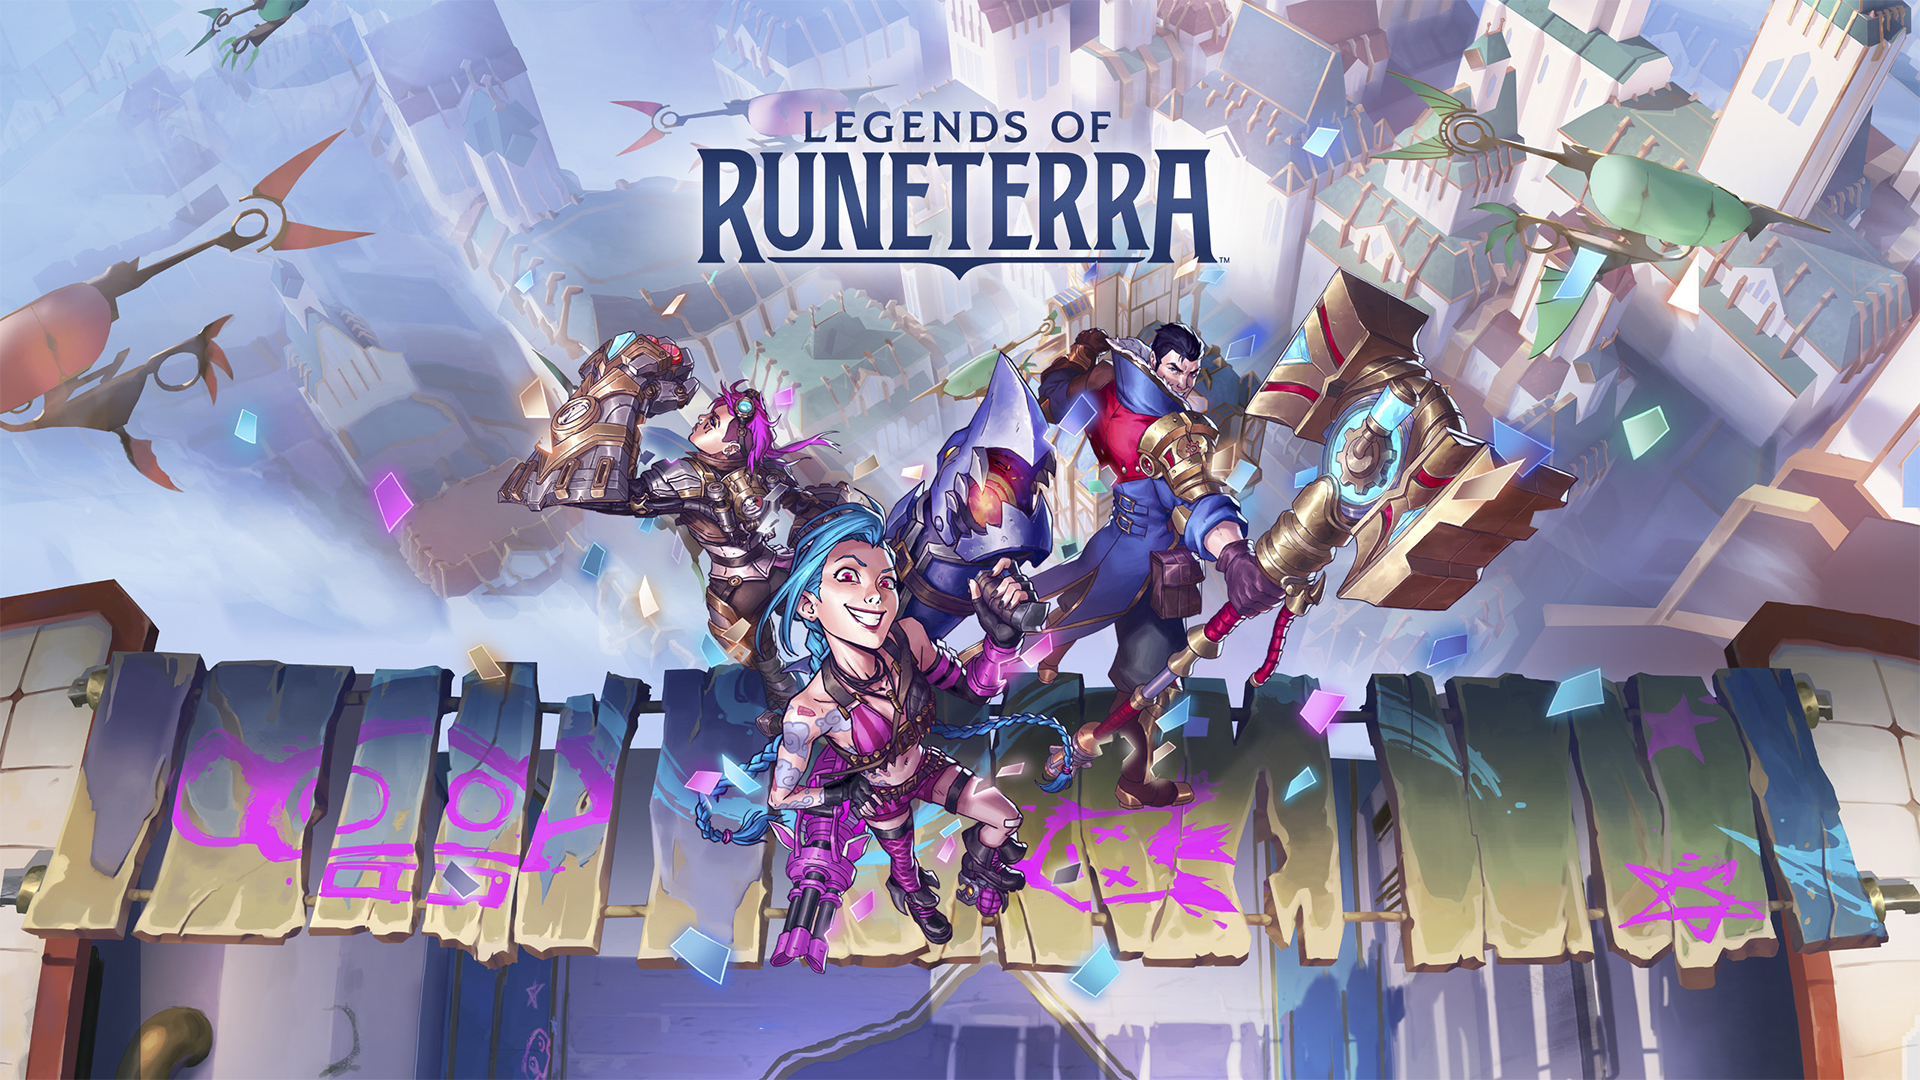 Legends Of Runeterra Will Be Getting Quarterly Update Cycles